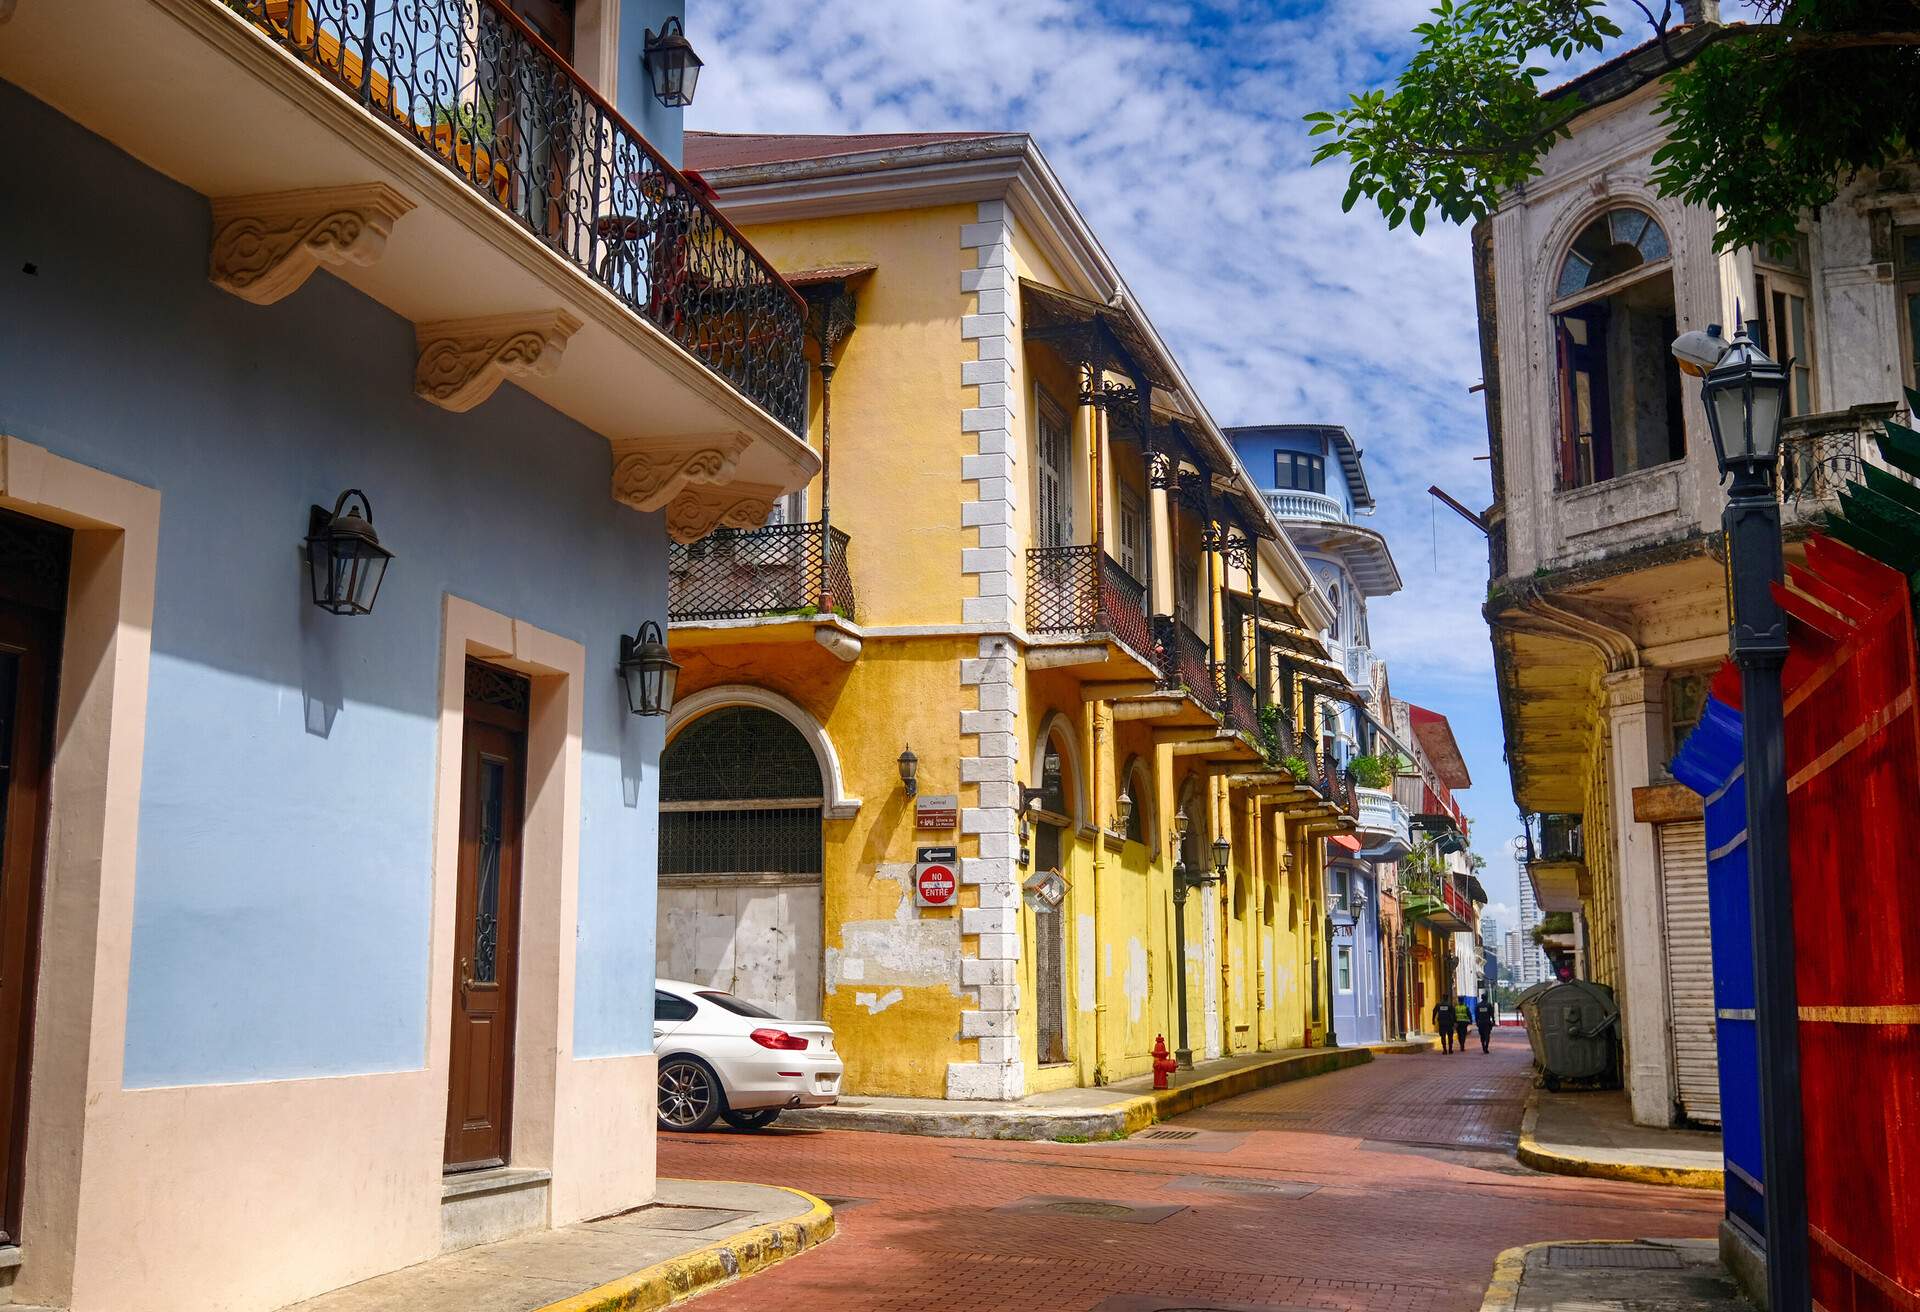 The less crowded streets of an old town surrounded by colourful buildings.